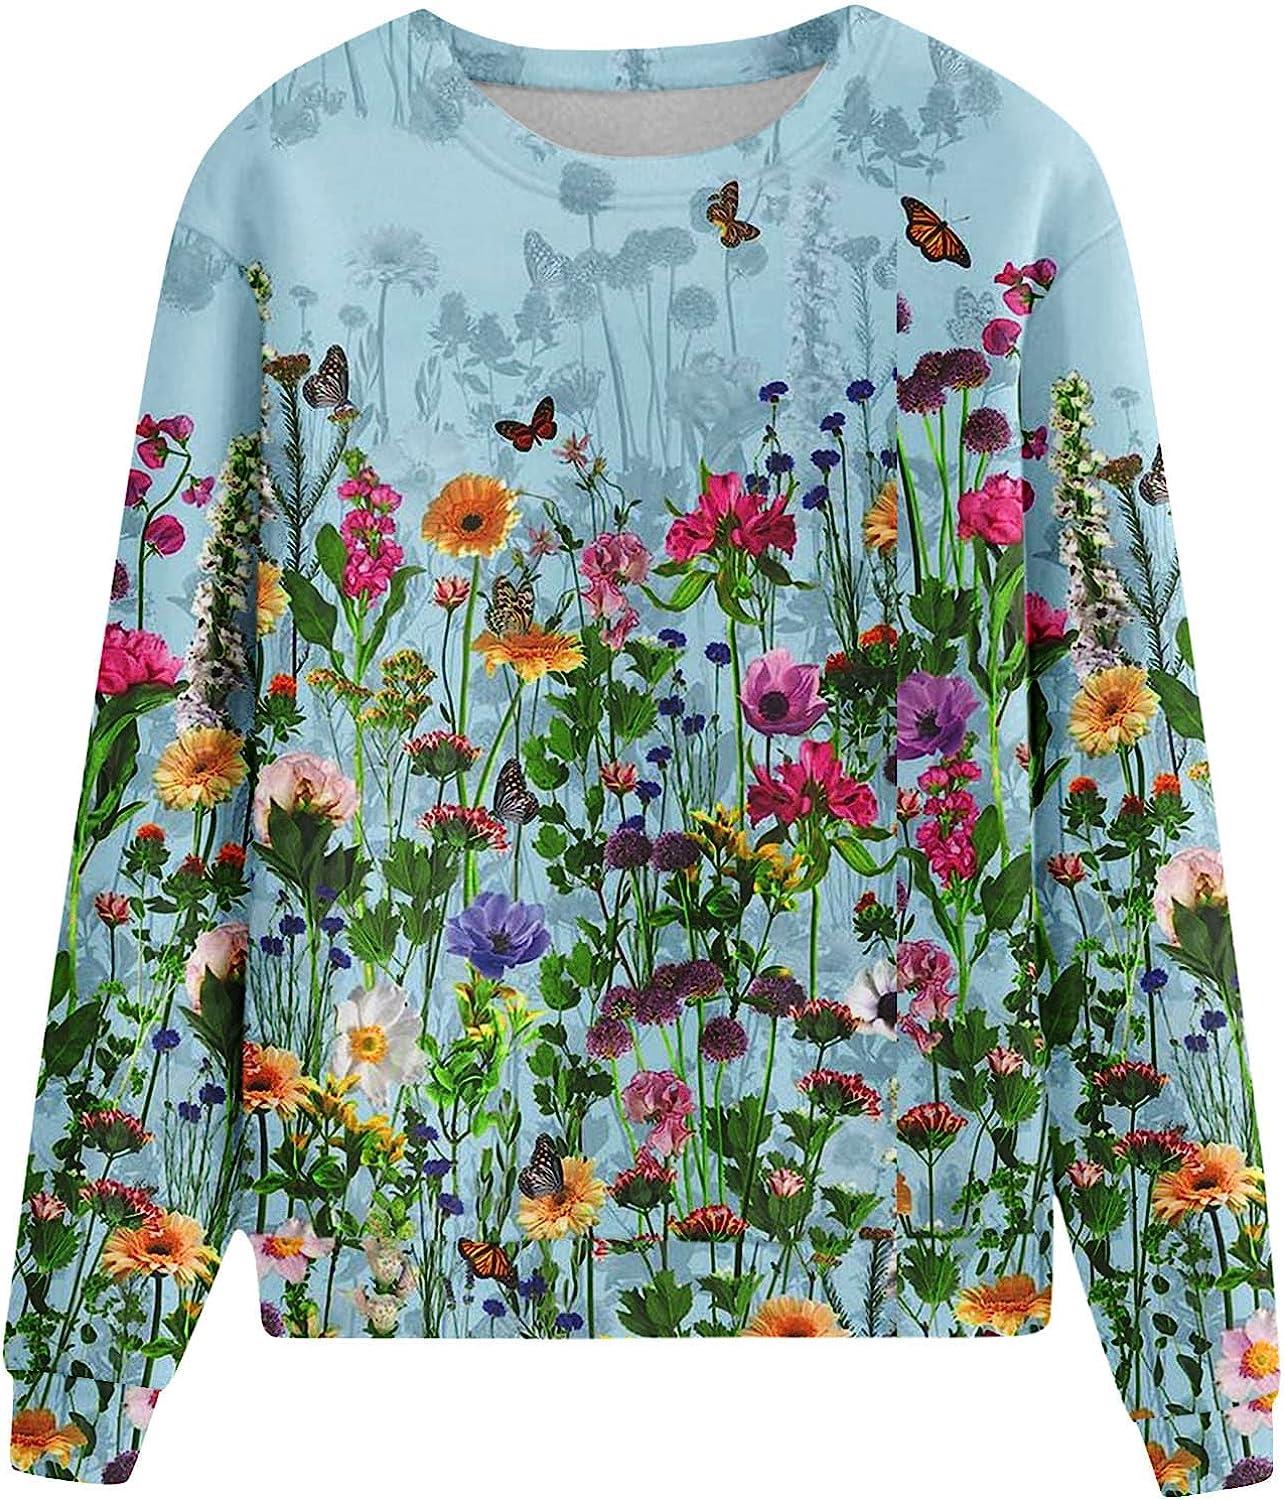 Fall Sweatshirts for Women Casual Crewneck Long Sleeve Tops Plus Size  Floral Shirts Loose Comfortable Blouses X-Large 02 Sky Blue